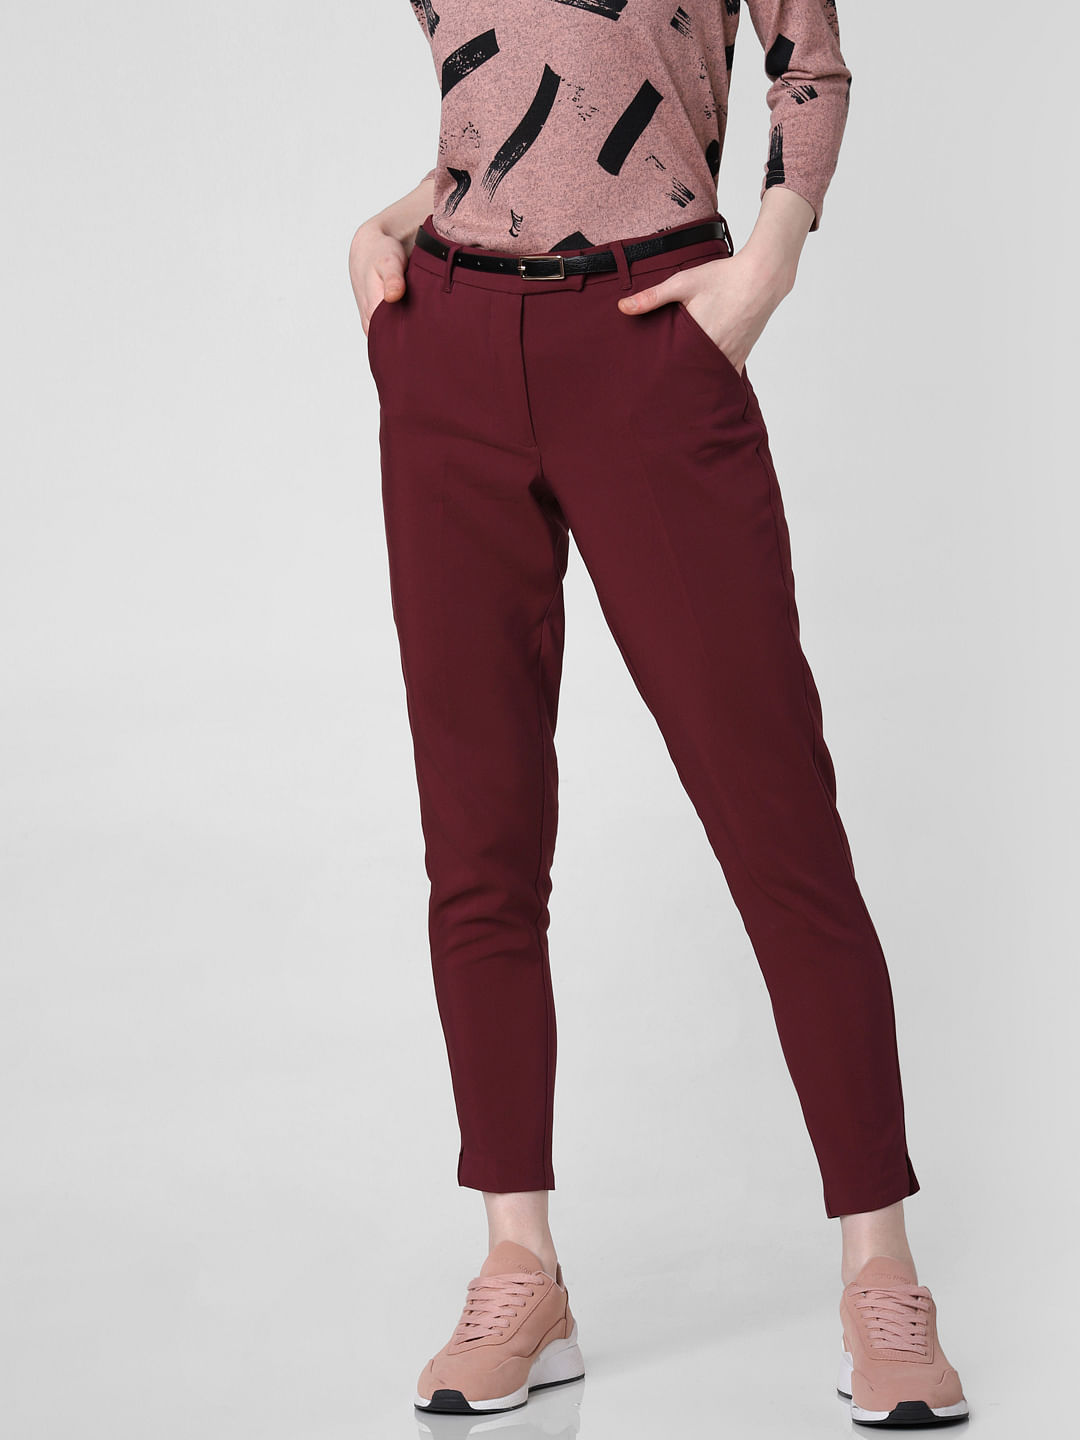 Buy Trouser For Men Online in India - Best Deals and Offers